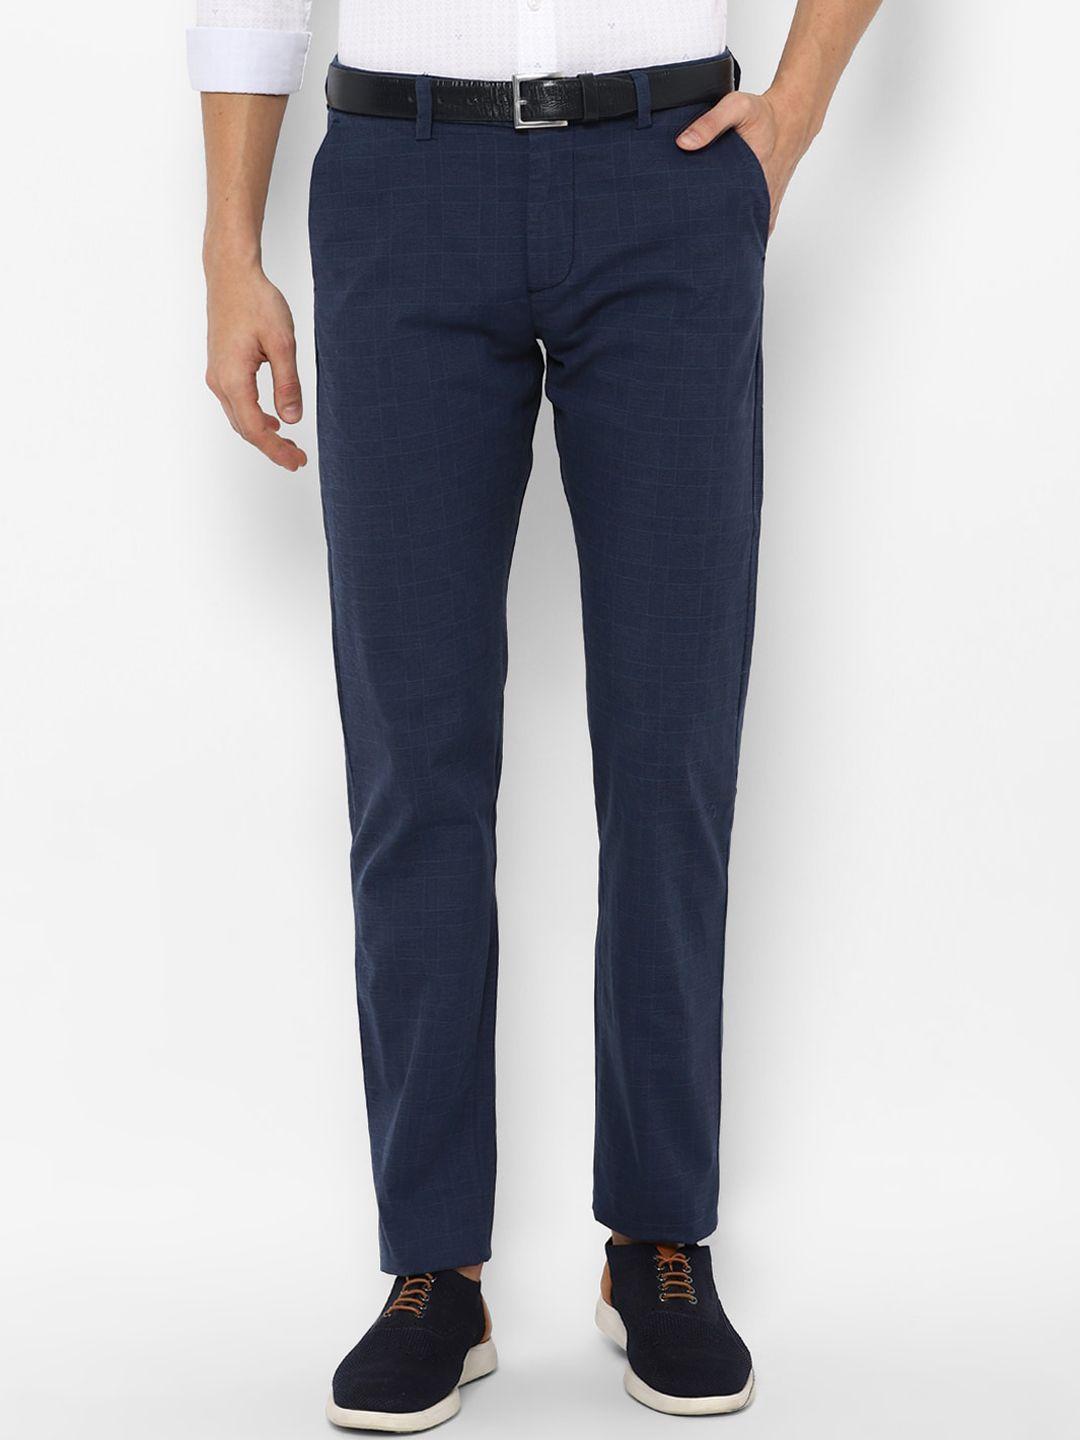 allen solly men navy blue checked slim fit trousers